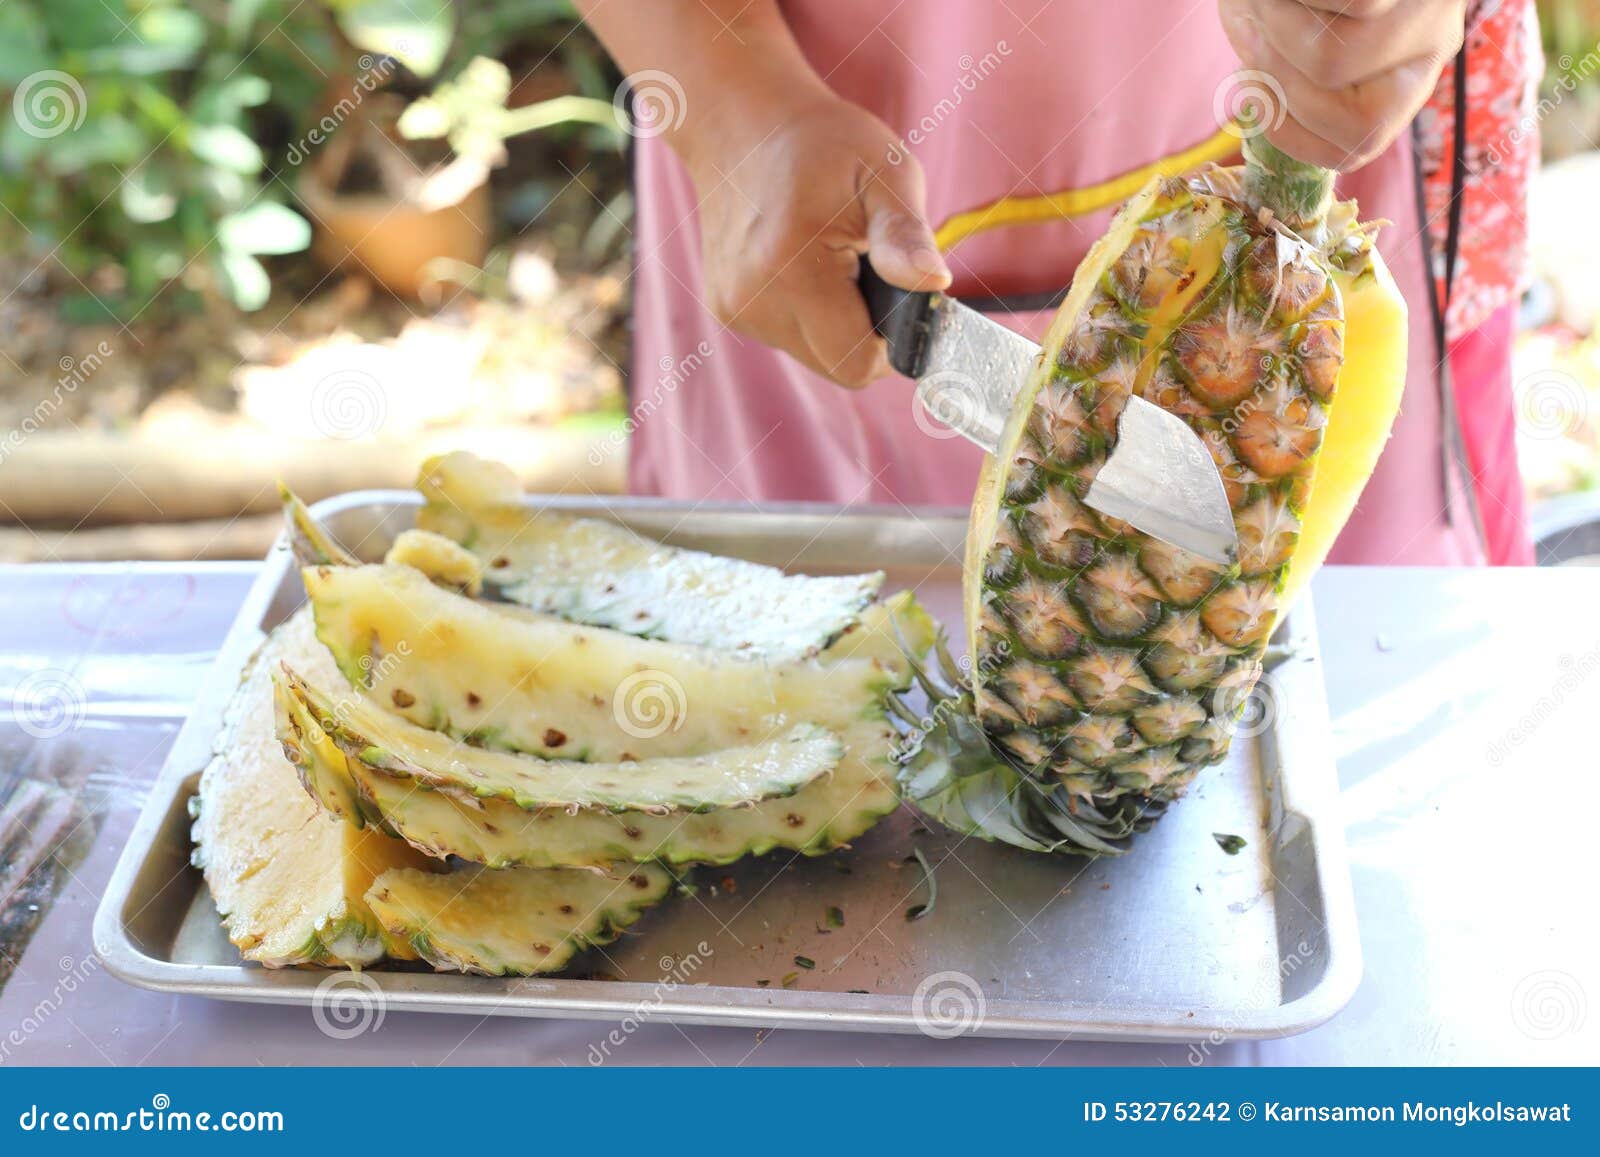 female seller's hands using a knife to pare pineapple